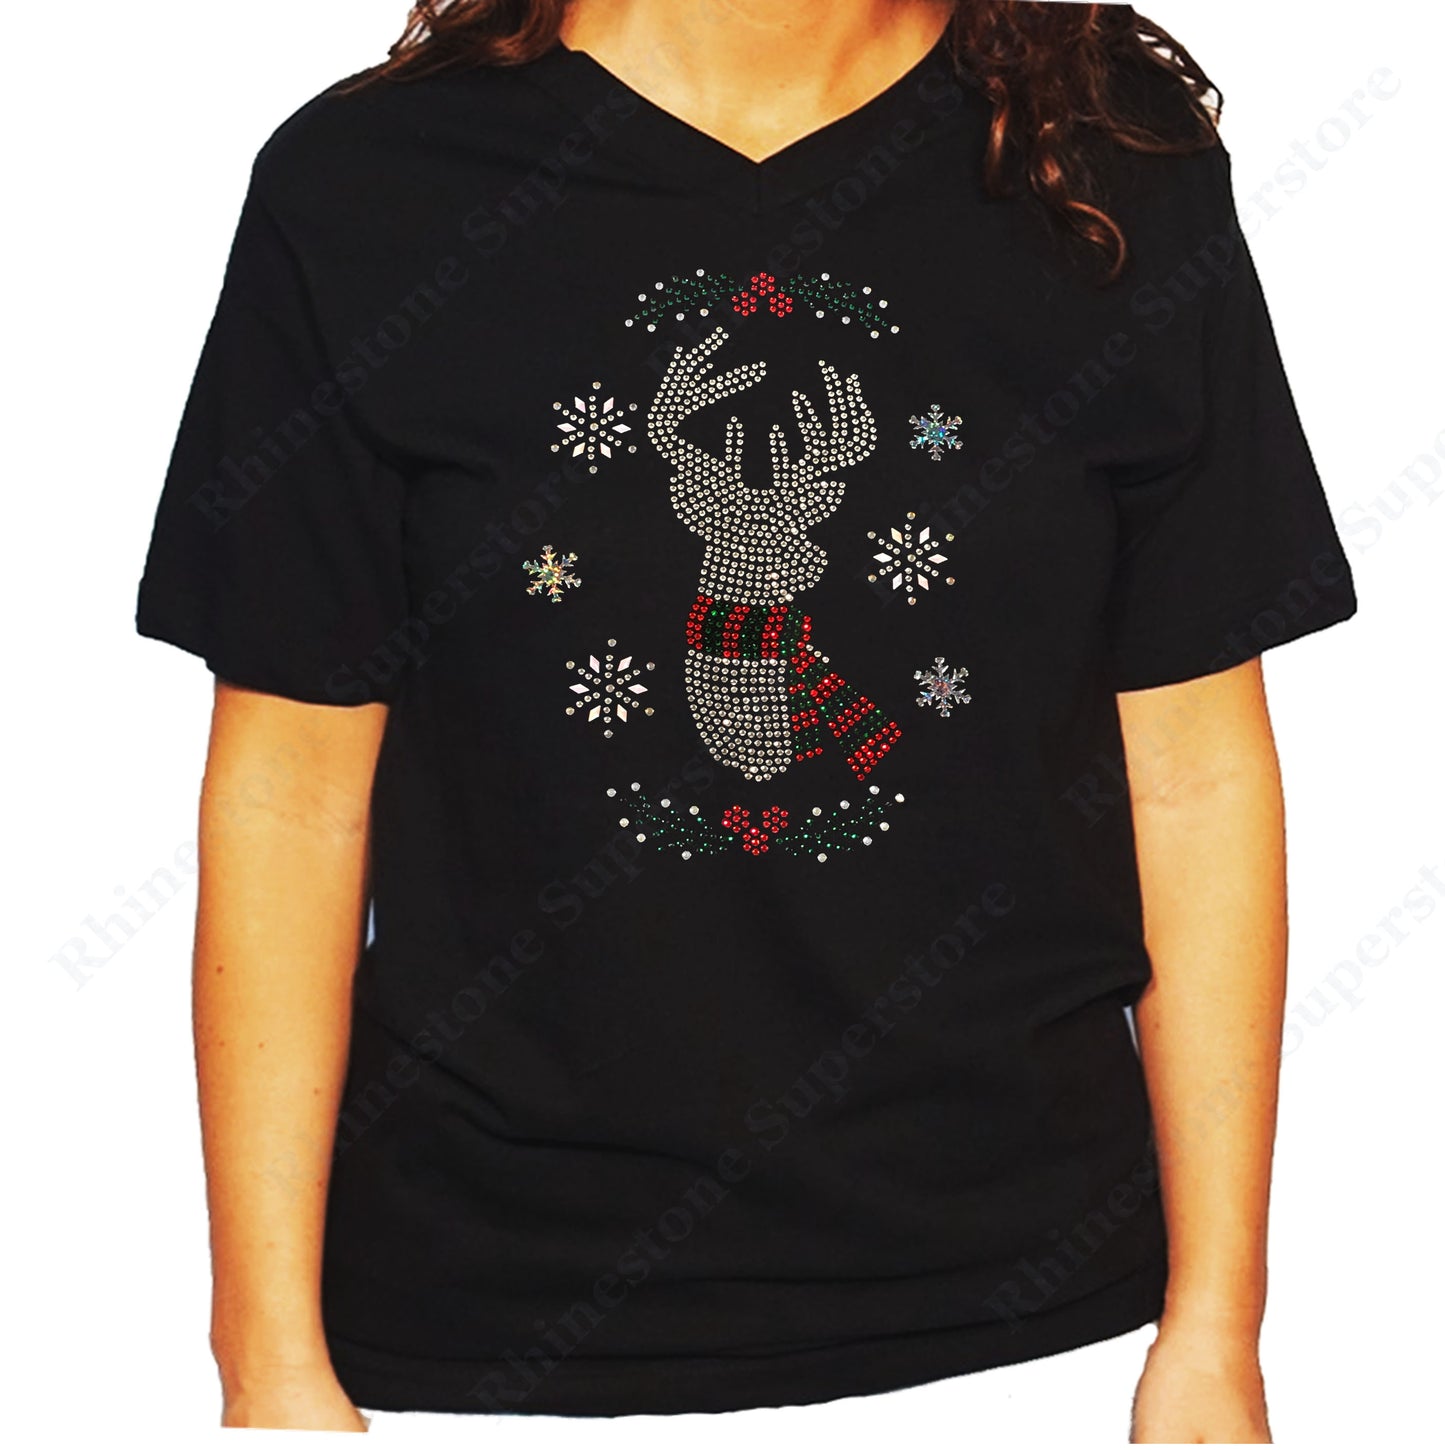 Women's / Unisex T-Shirt with Christmas Reindeer with Snowflakes in Rhinestones